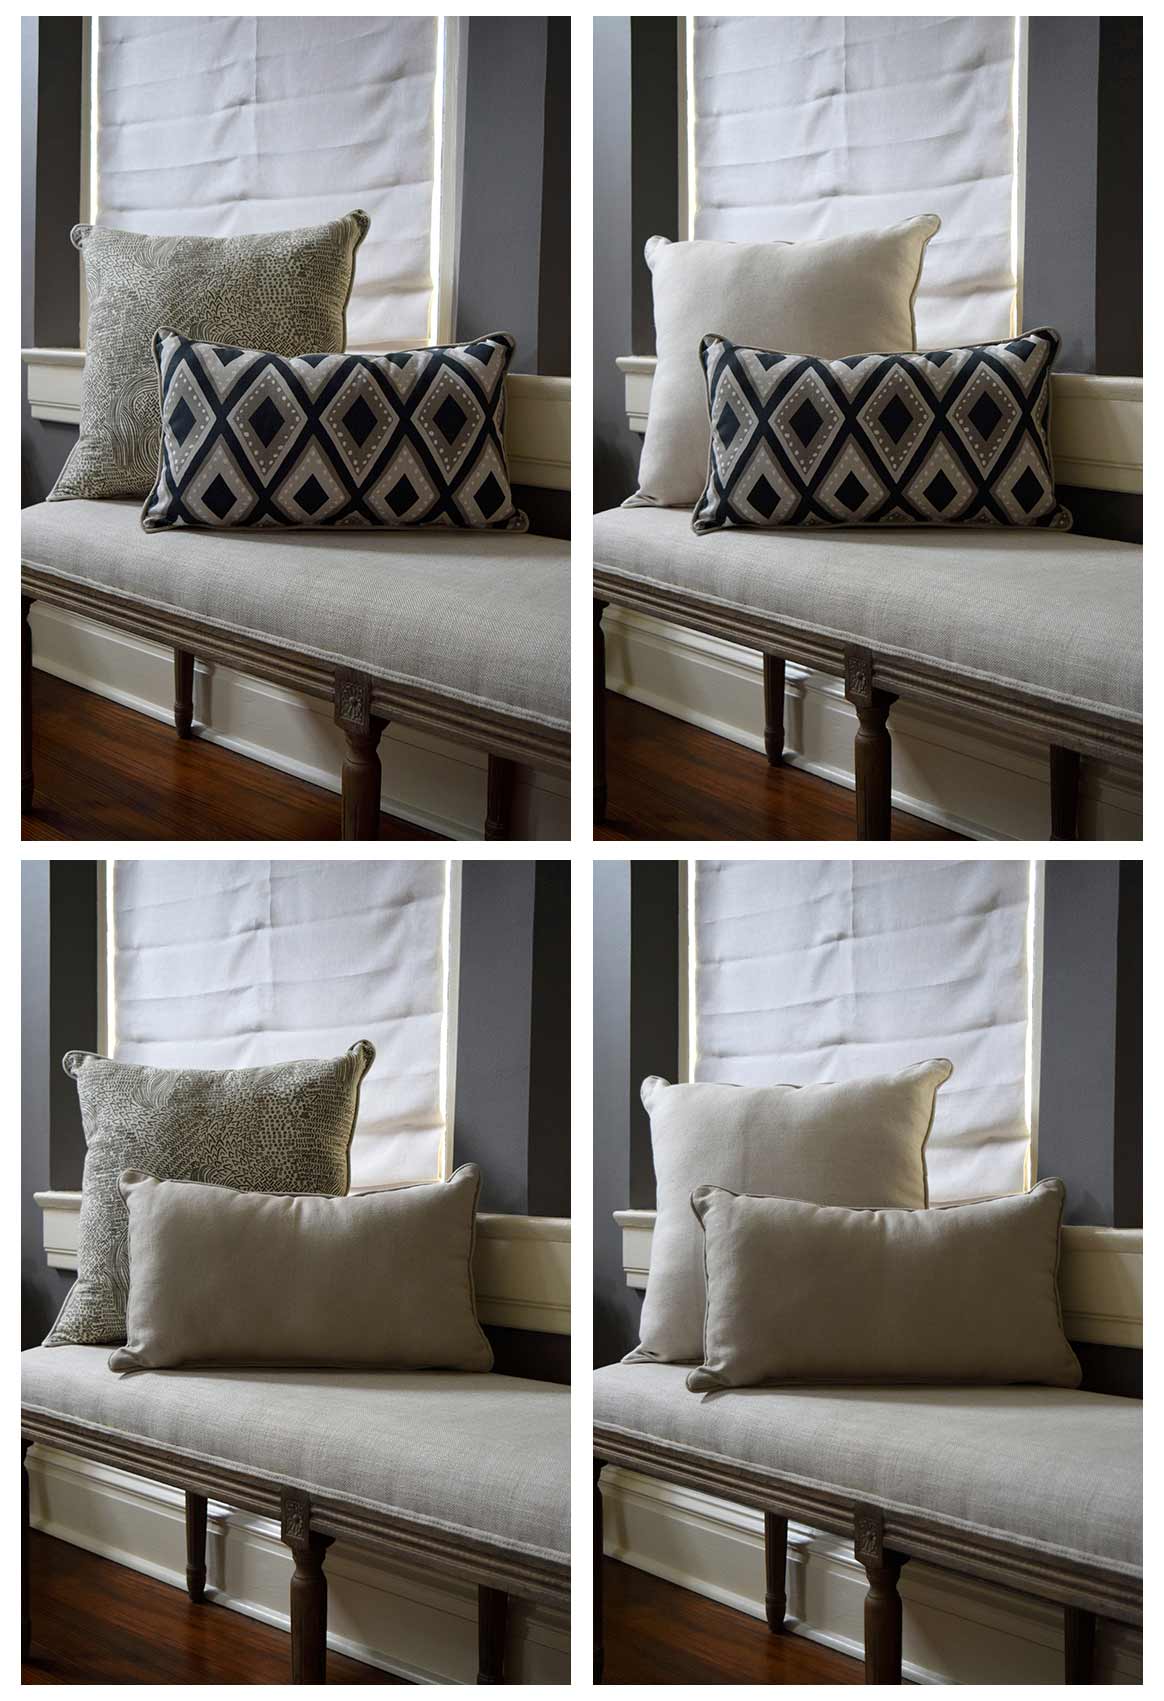 https://www.cushionsource.com/blog/wp-content/uploads/2016/01/4-Looks-with-2-Reversible-Pillows.jpg